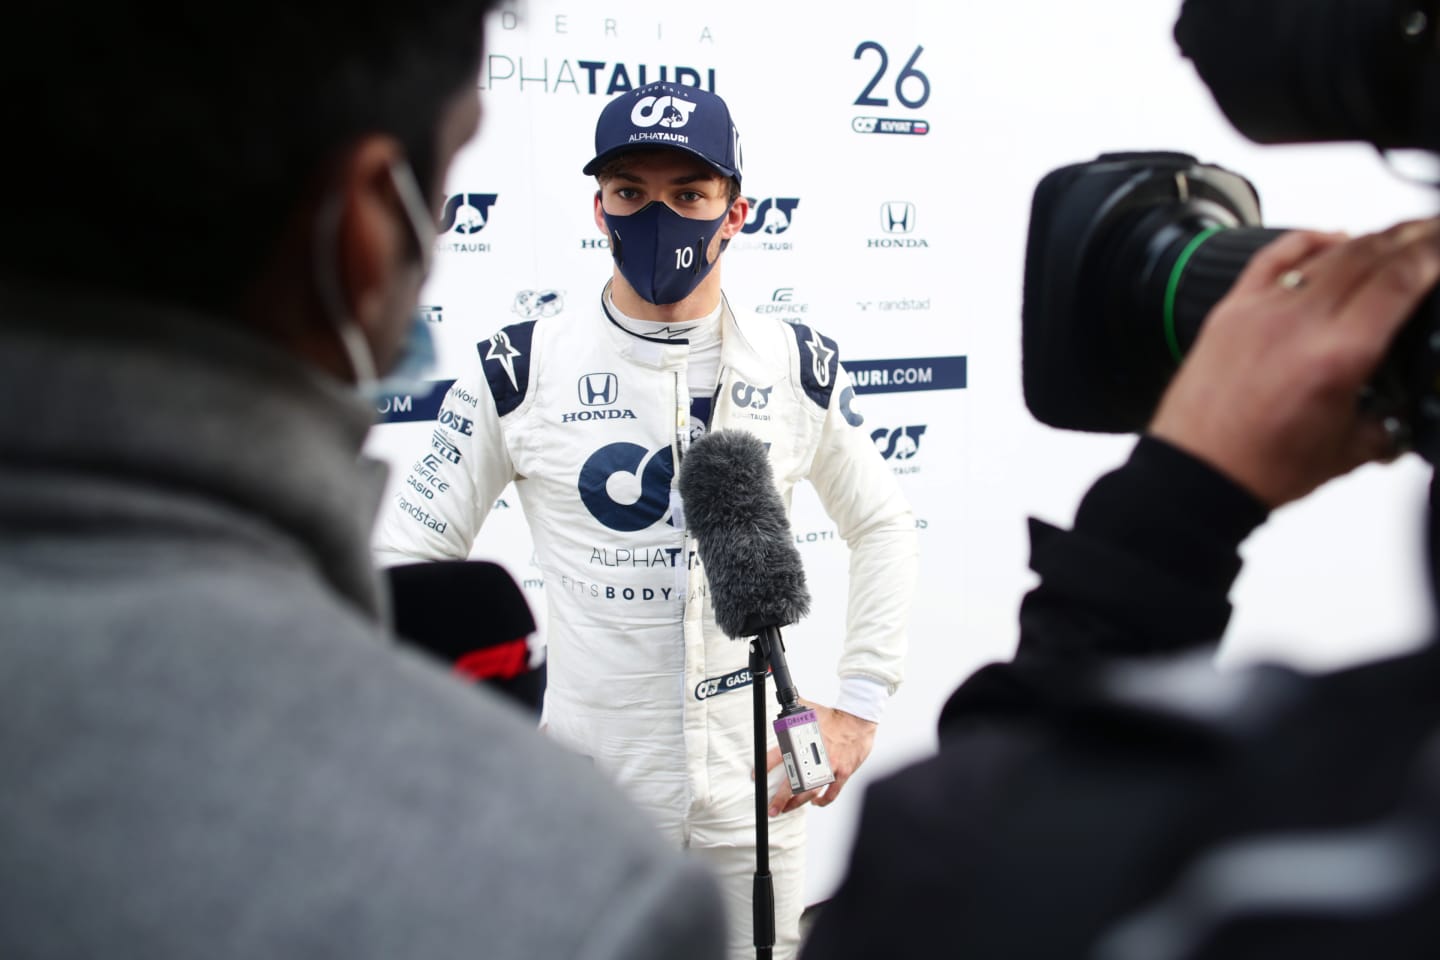 ISTANBUL, TURKEY - NOVEMBER 13: Pierre Gasly of France and Scuderia AlphaTauri talks to the media in the Paddock during practice ahead of the F1 Grand Prix of Turkey at Intercity Istanbul Park on November 13, 2020 in Istanbul, Turkey. (Photo by Peter Fox/Getty Images)